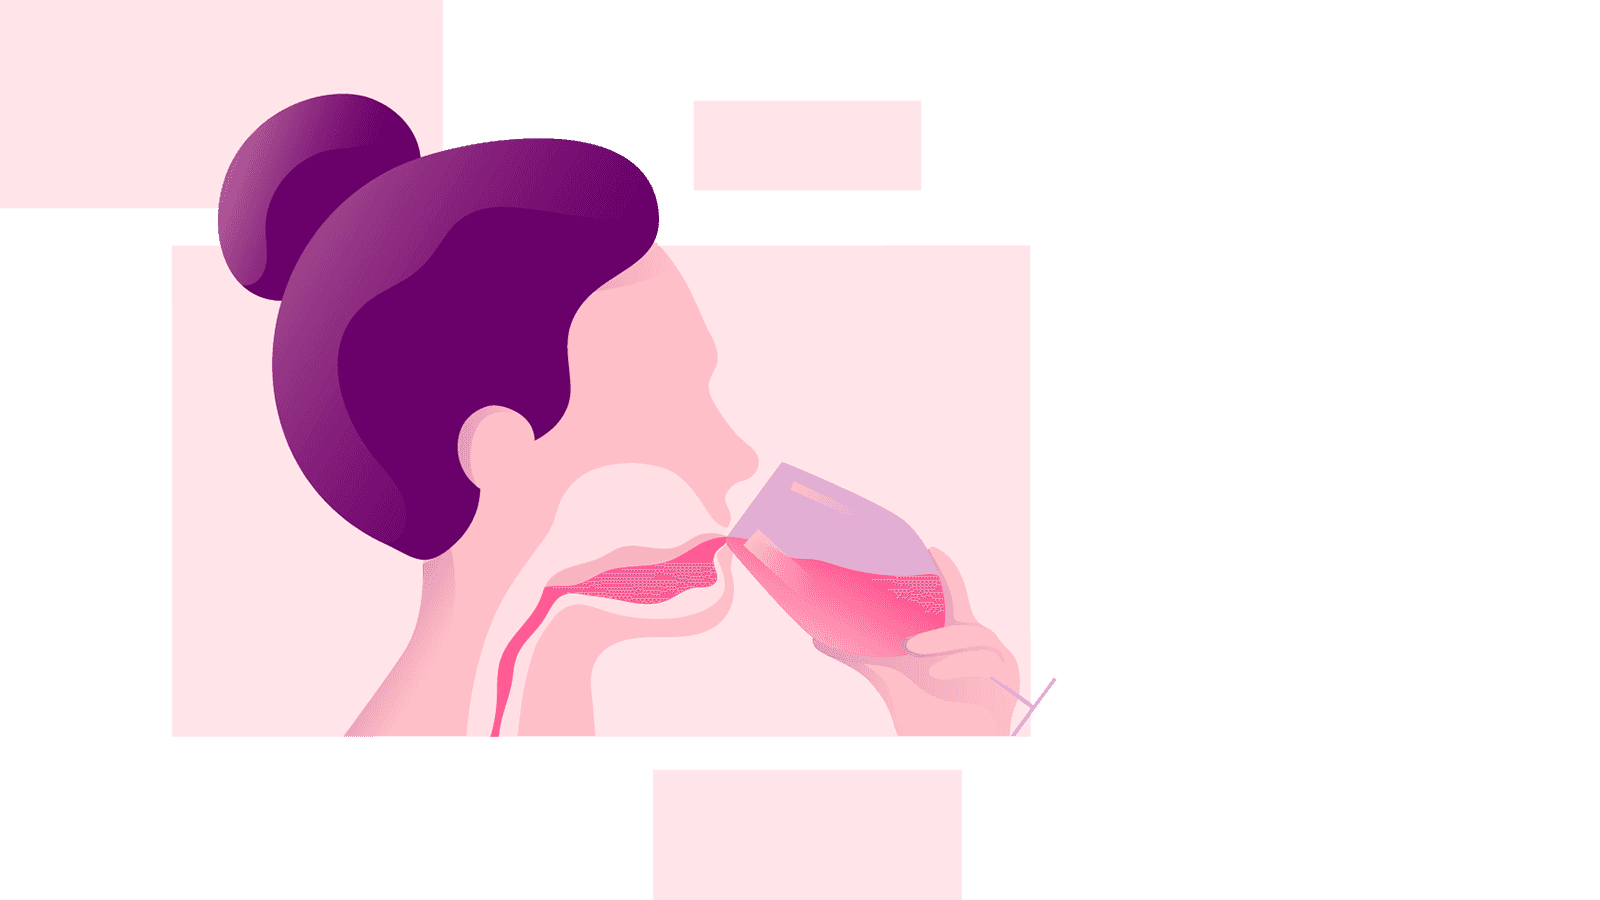 Illustration of a person drinking alcohol with liquid entering the mouth and passing down the throat.